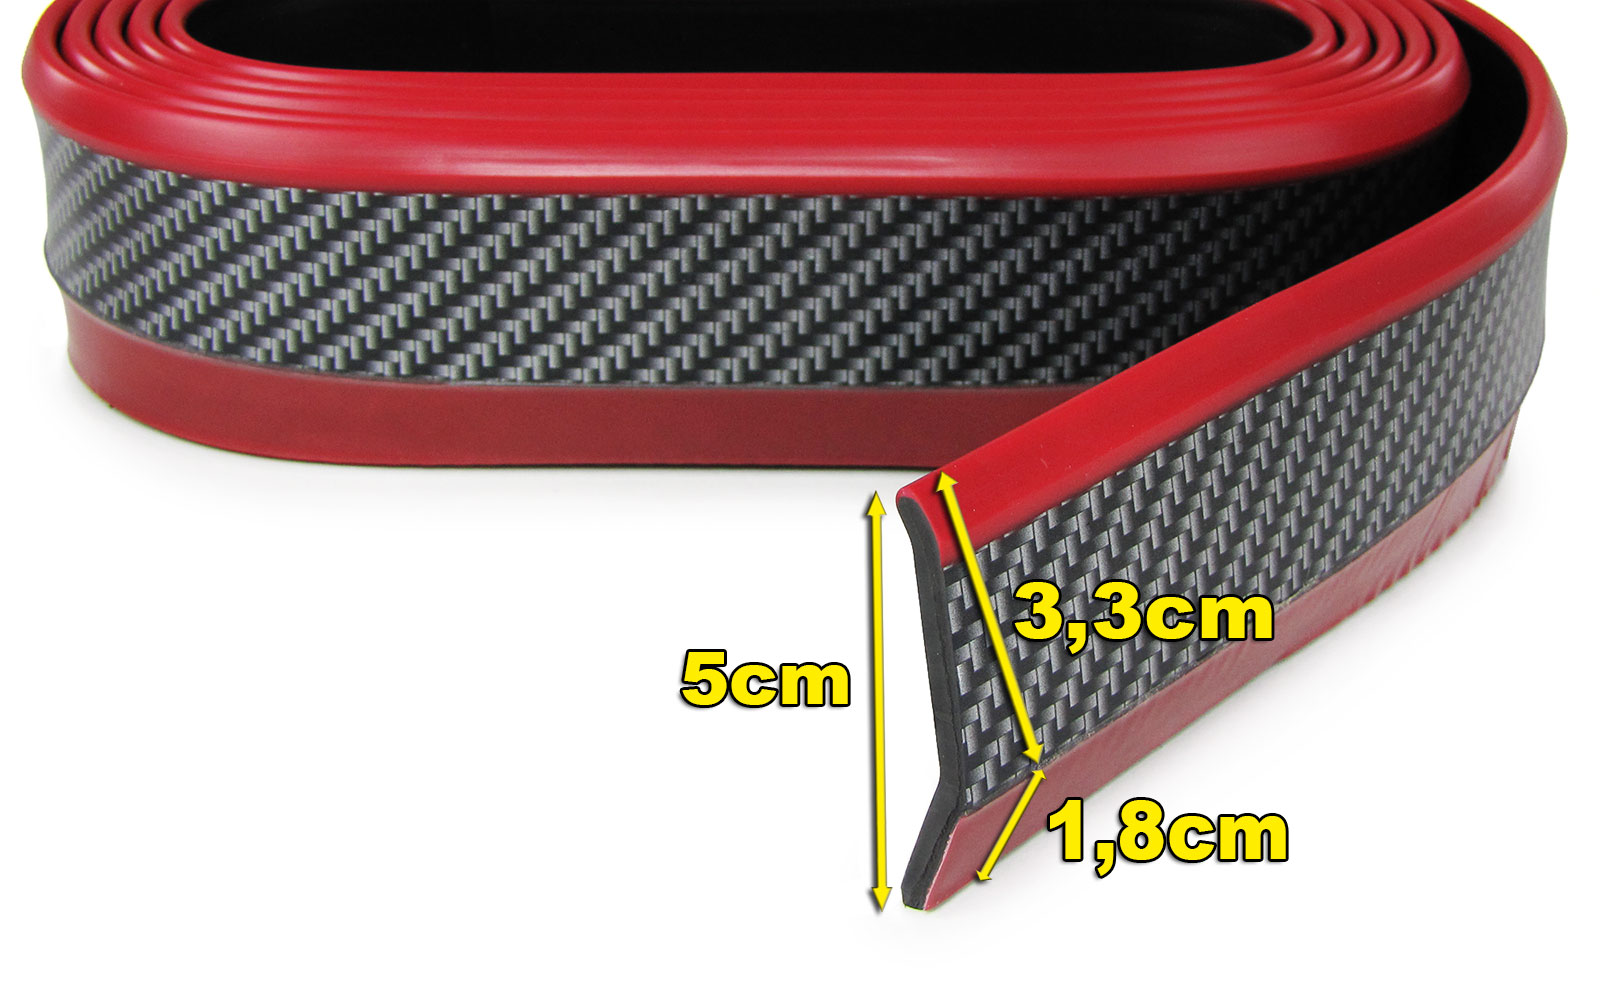 Universal Spoiler Lippe Carbon Look Rot